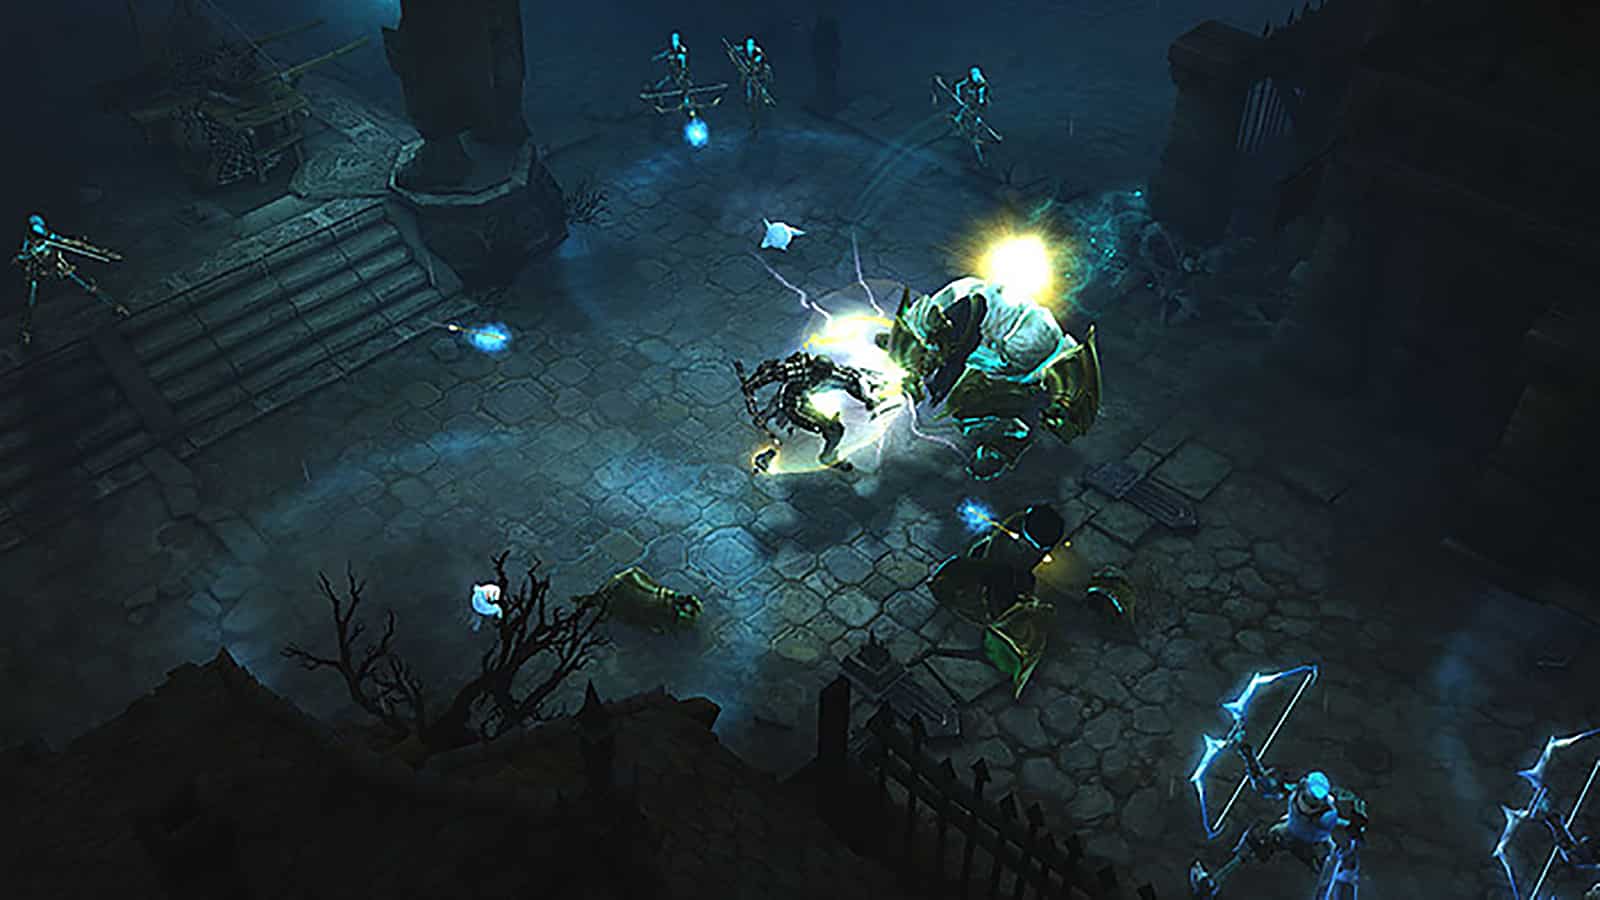 Gameplay image of one of Diablo 3's character classes in Reaper of Souls